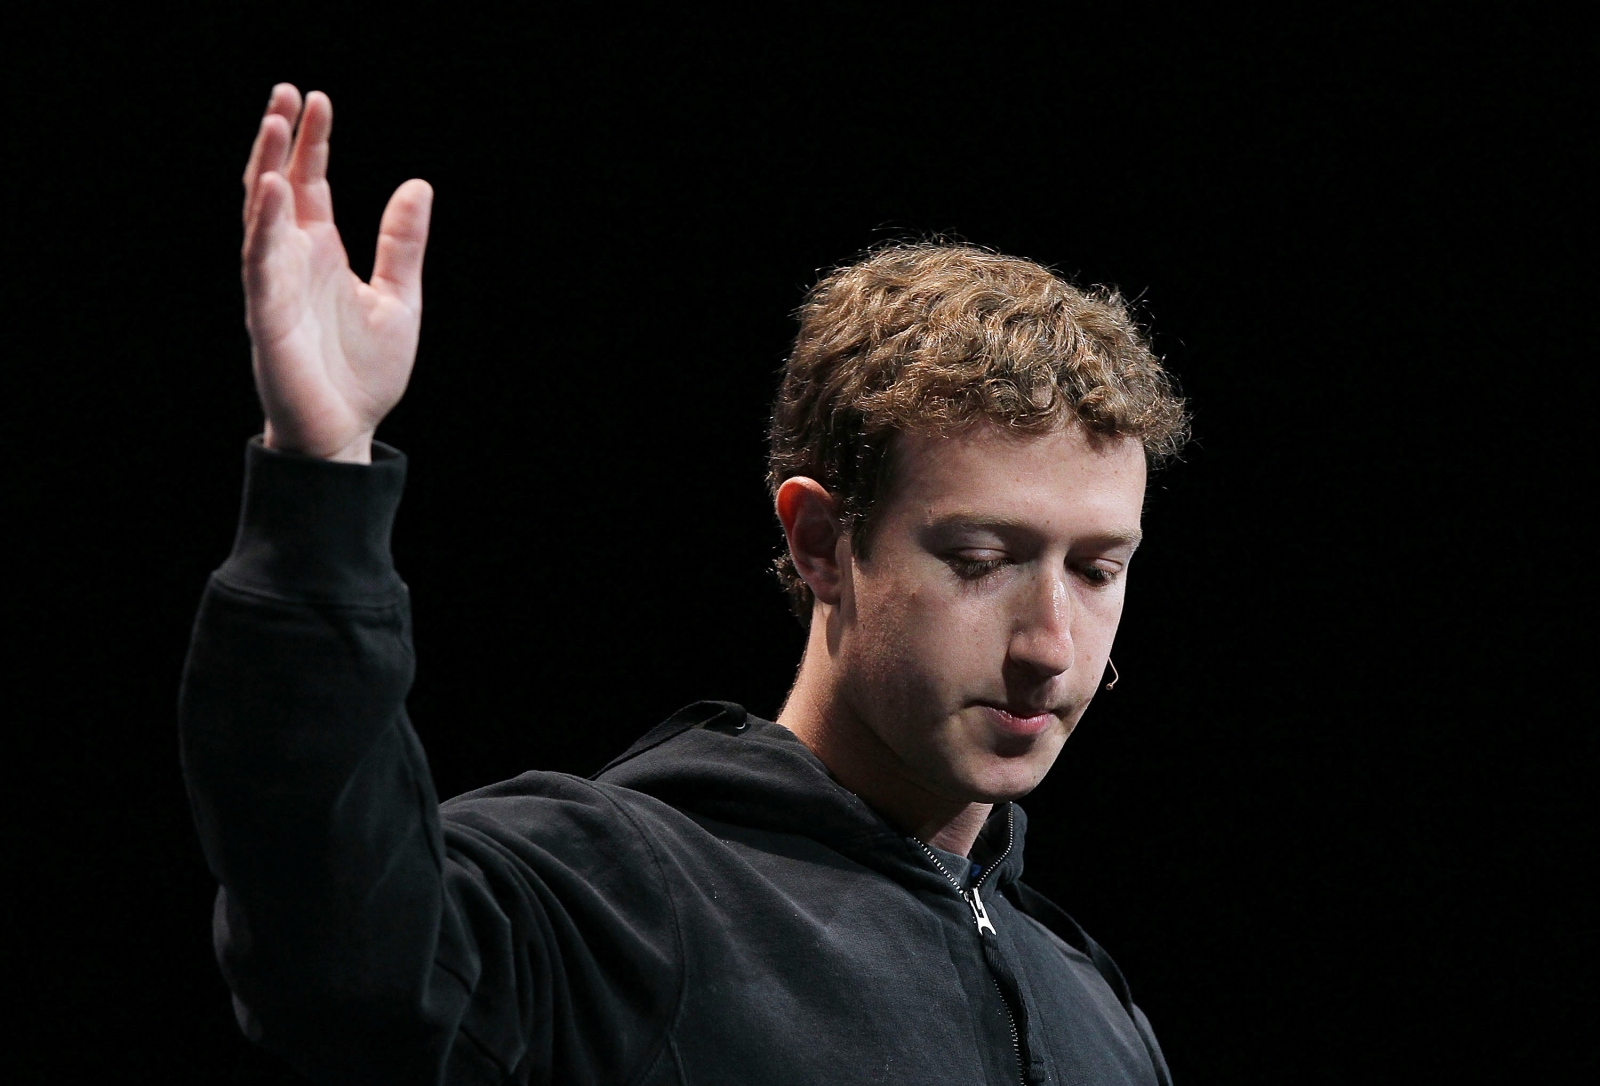 We should fear Mark Zuckerberg's power and his utopian vision for the future